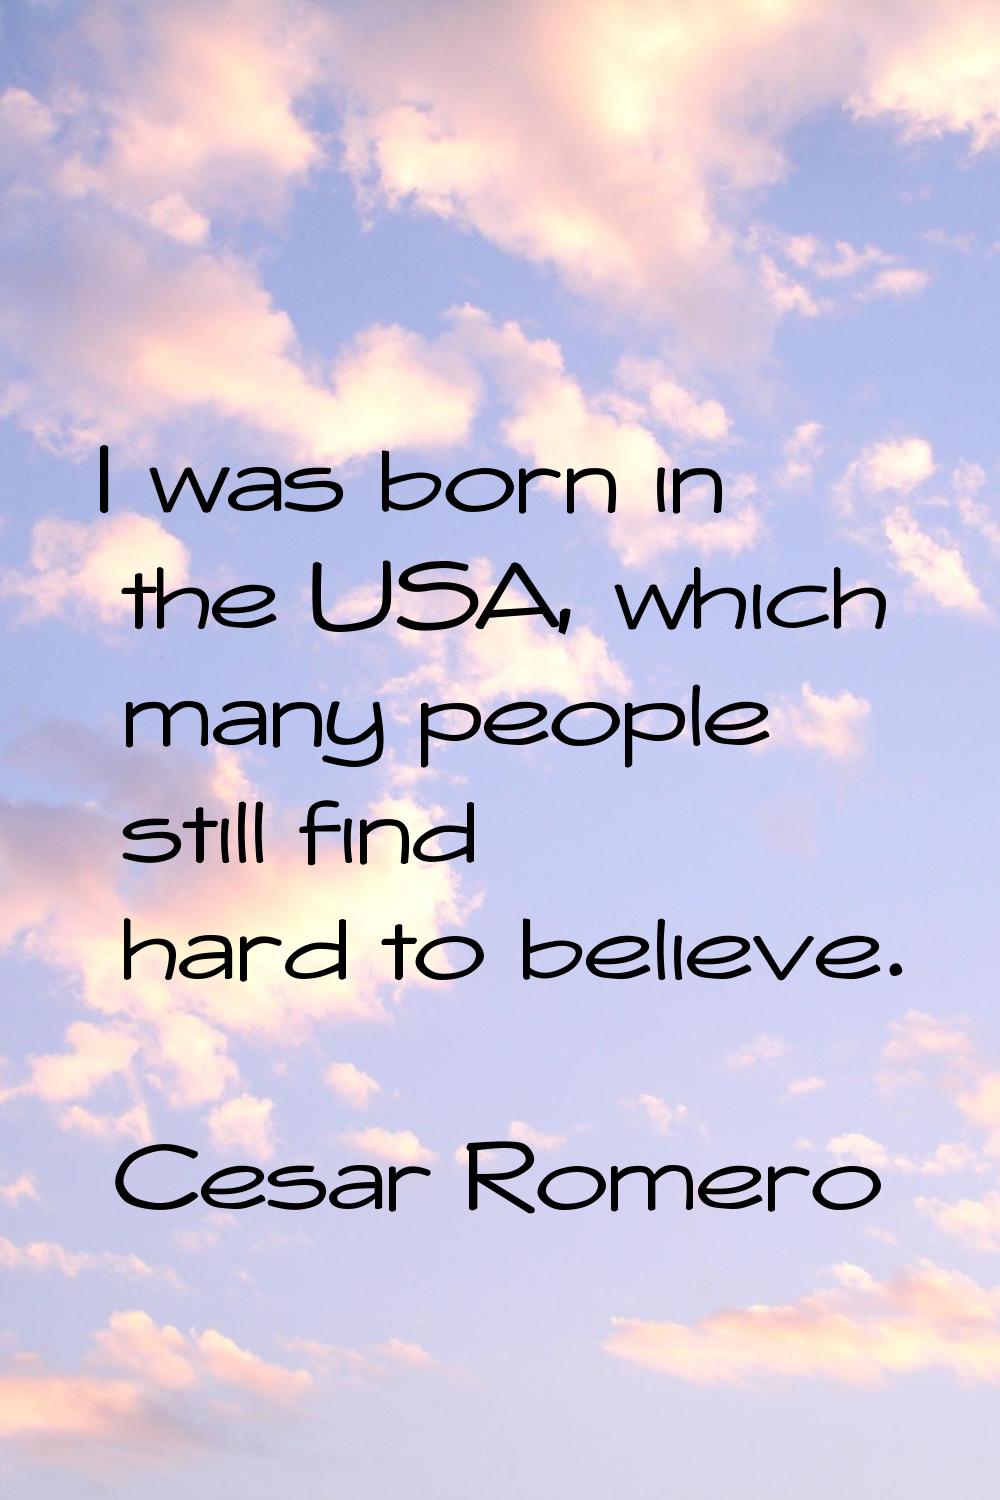 I was born in the USA, which many people still find hard to believe.